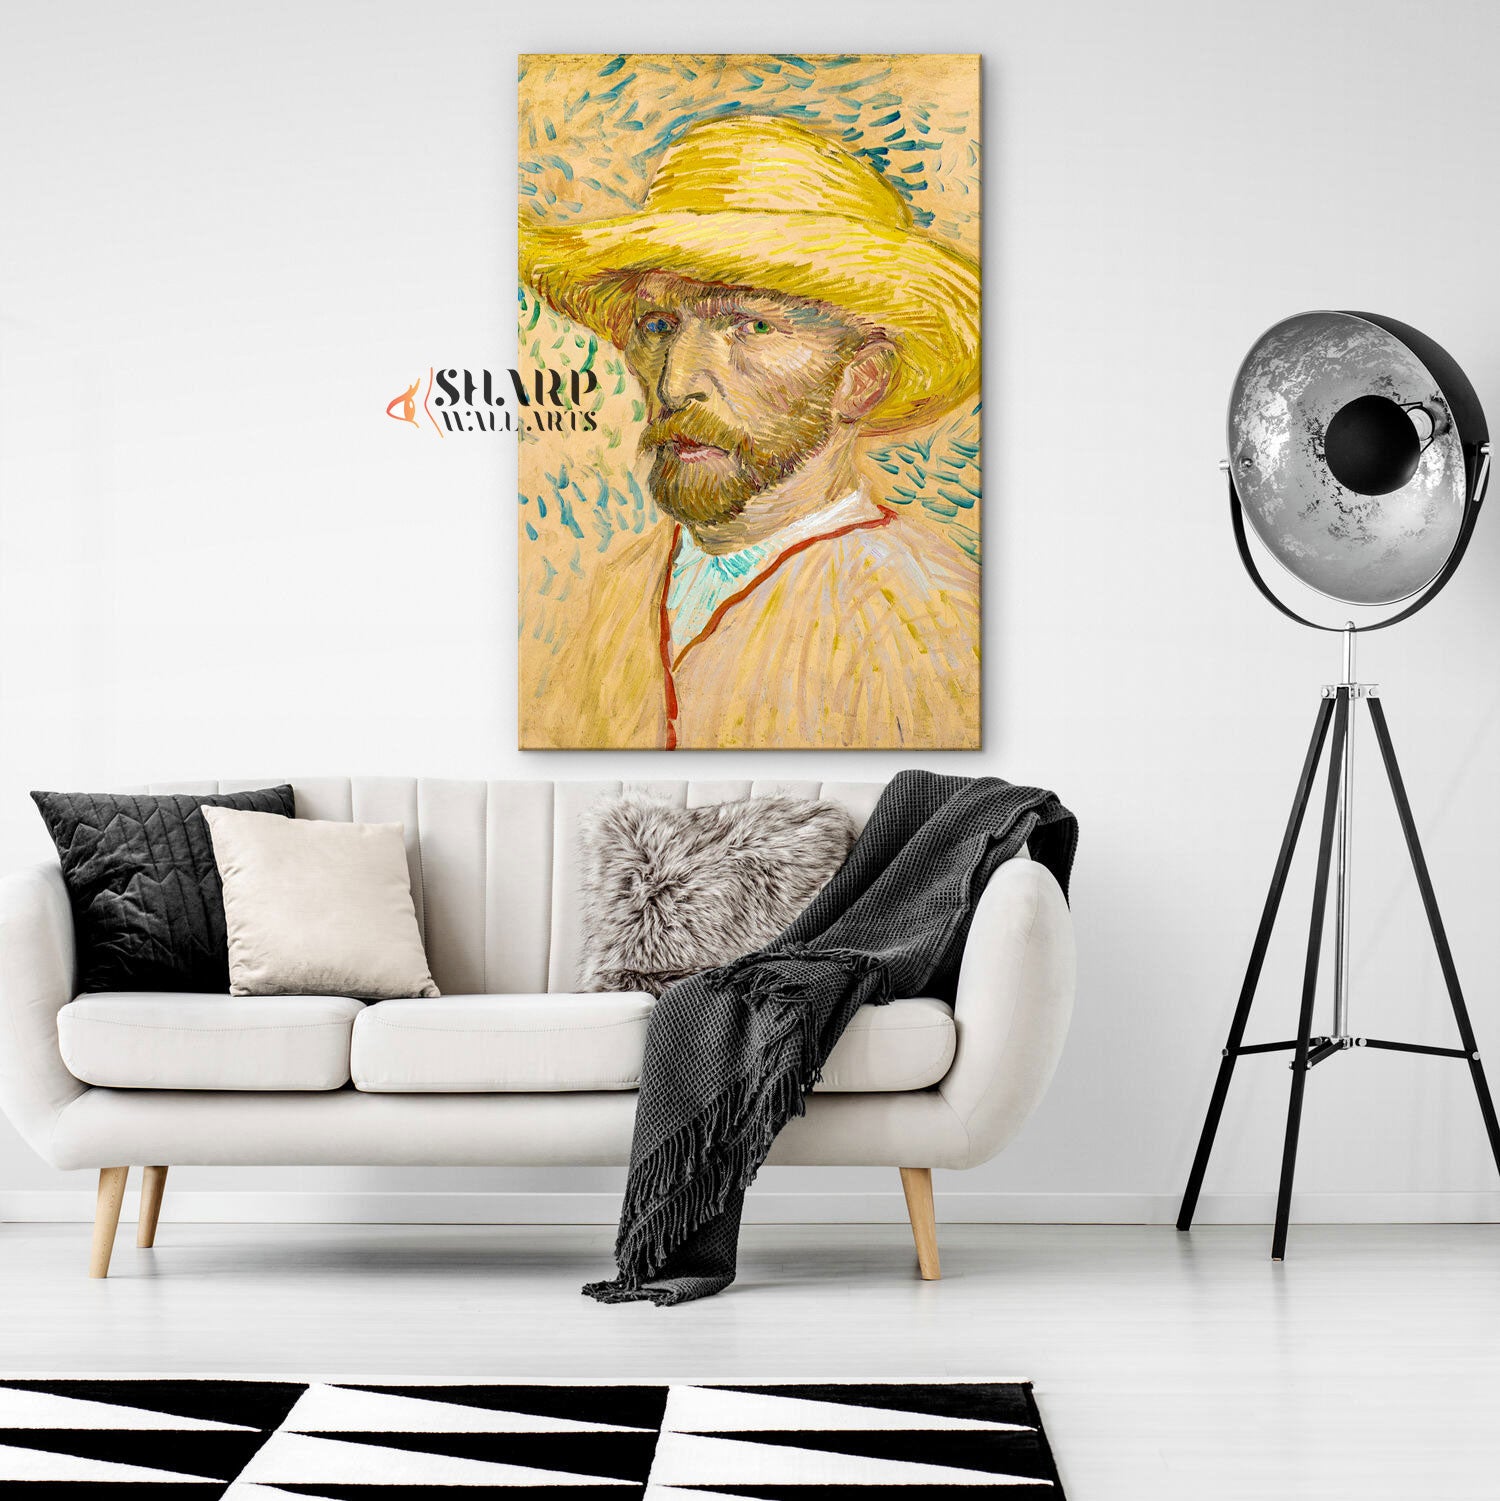 Vincent van Gogh Self-Portrait With Straw Hat Canvas Wall Art